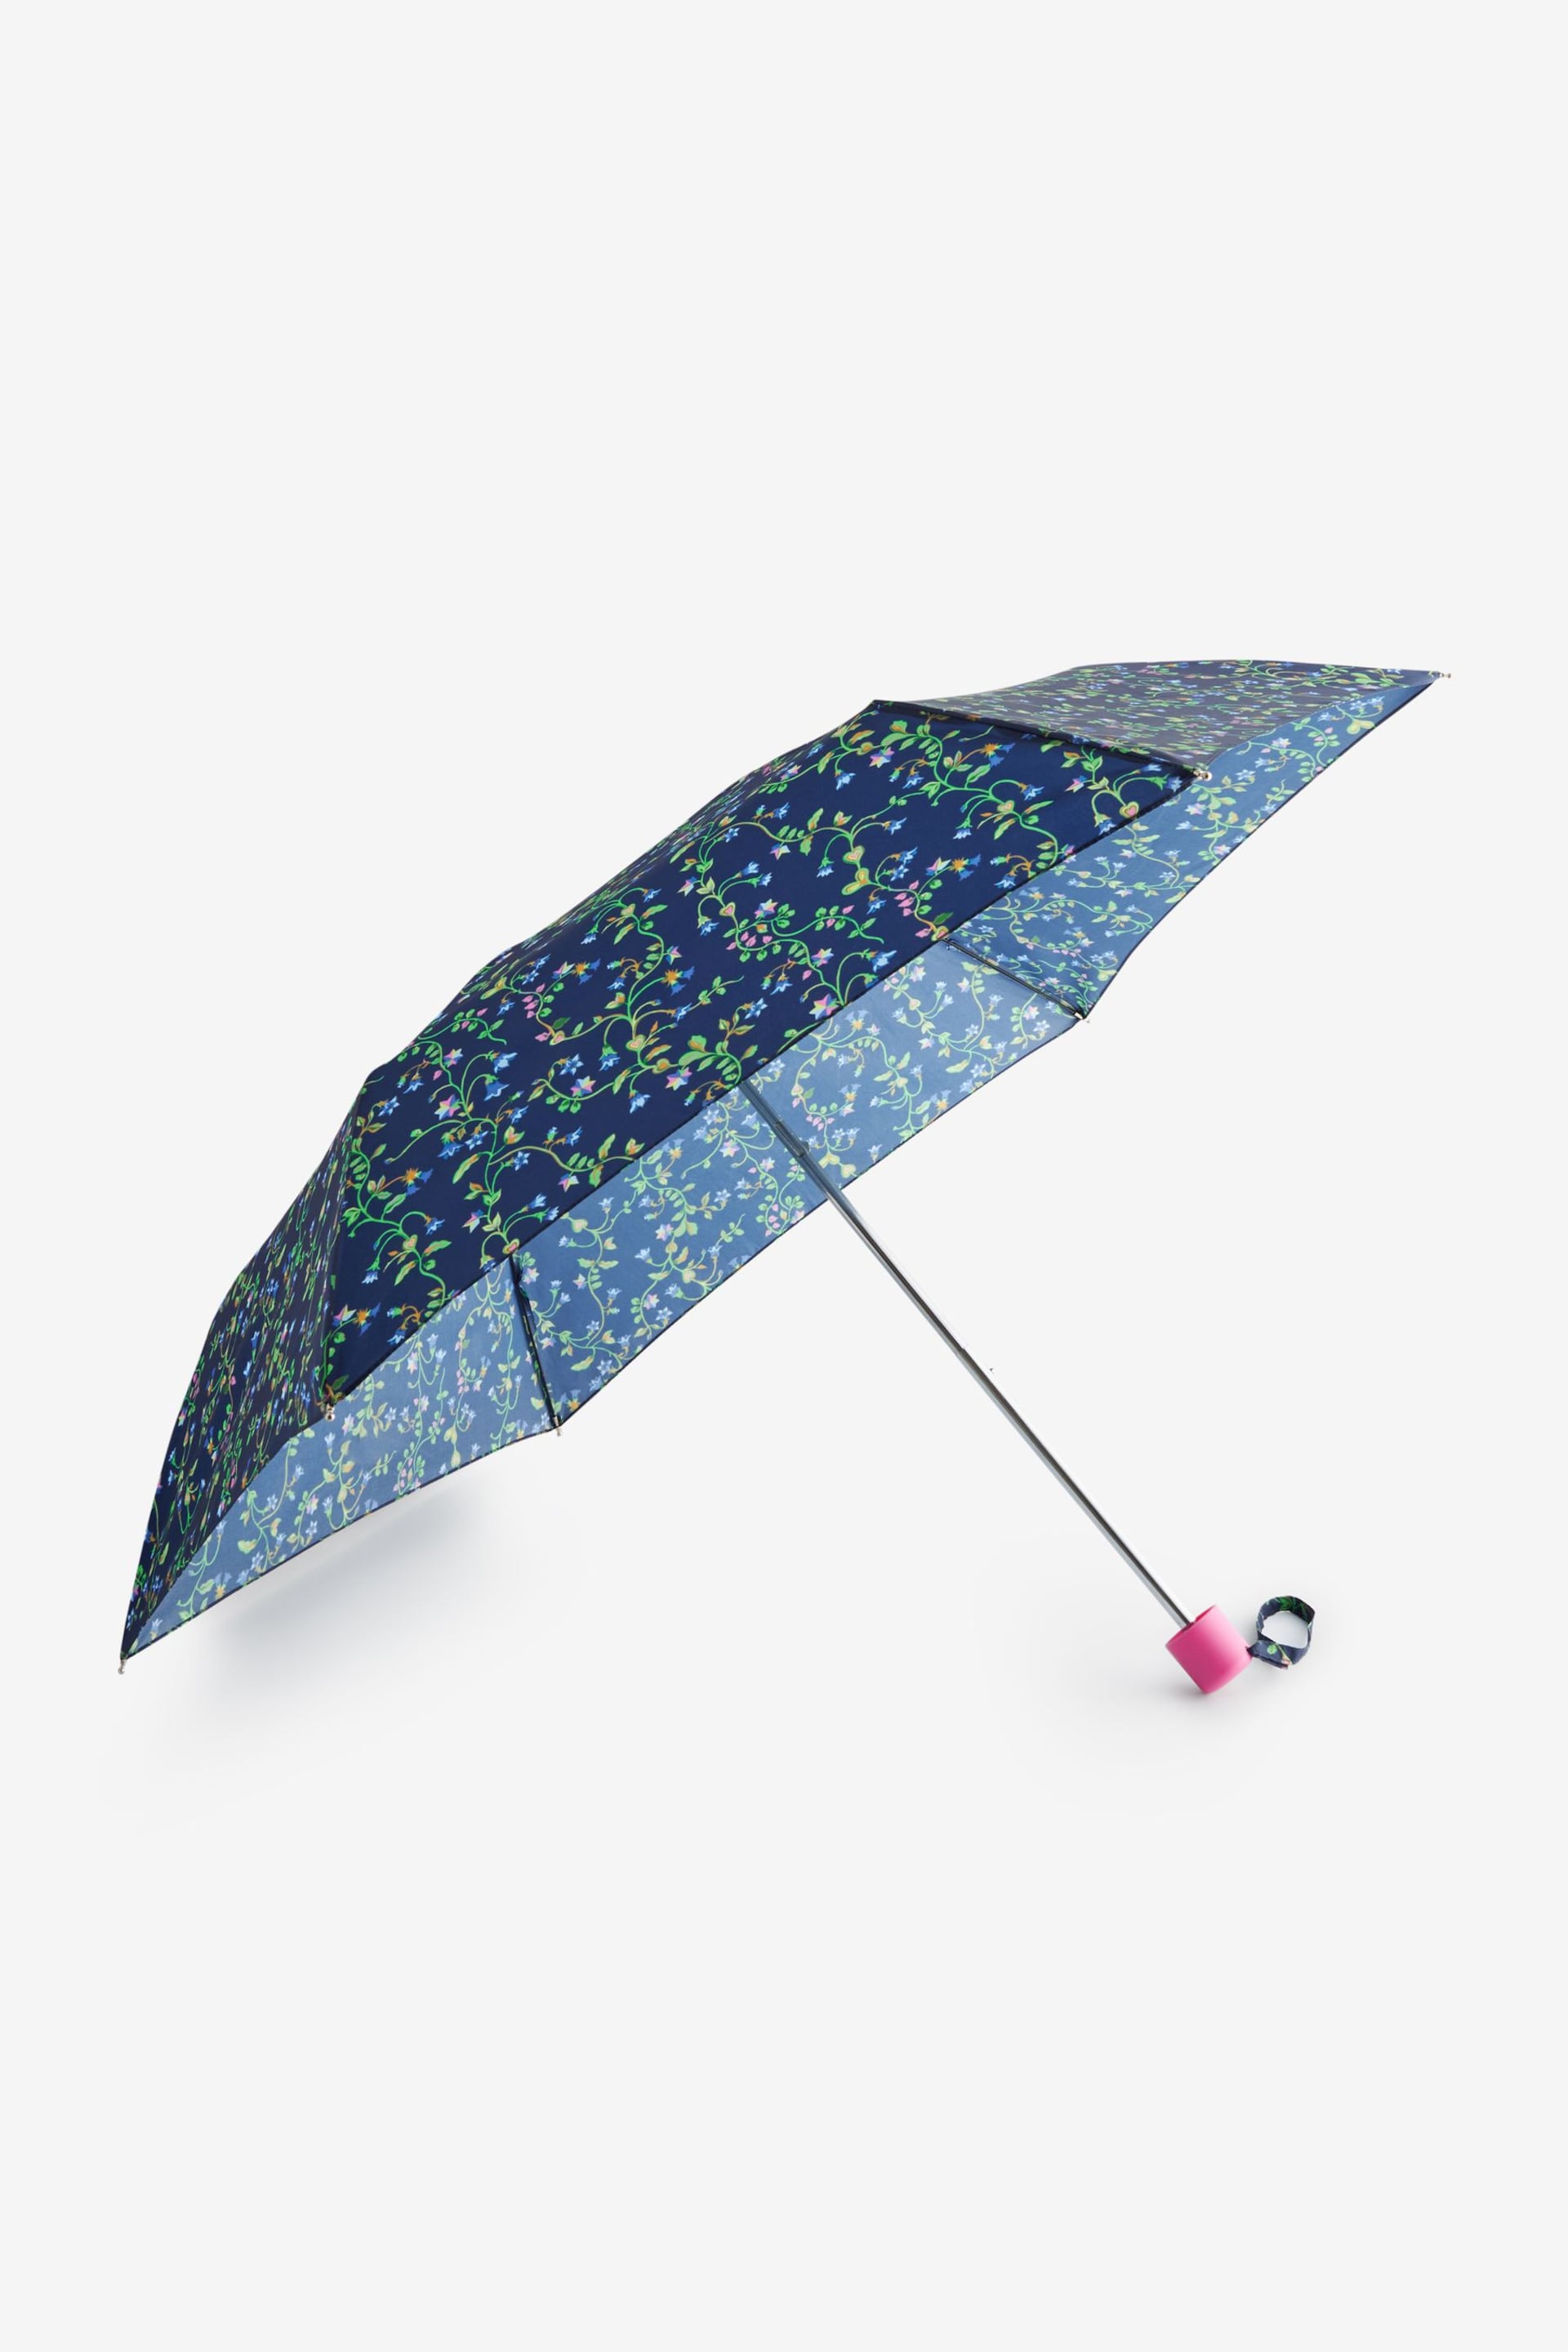 Cath Kidston Navy Floral Print Compact Umbrella - Image 1 of 2